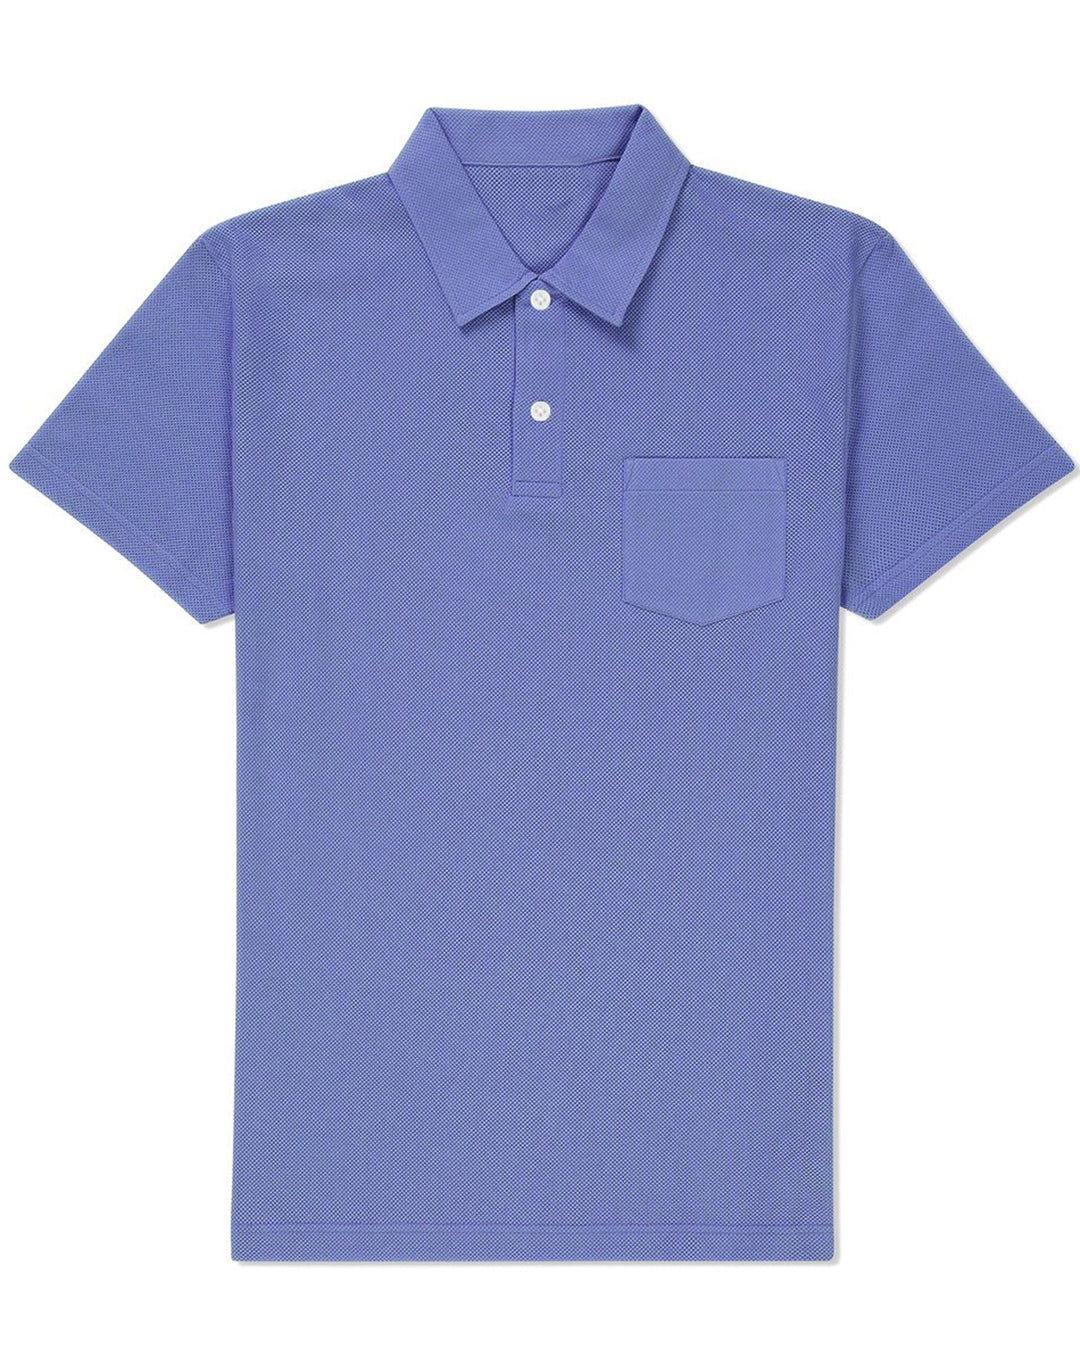 Front of the custom oxford polo shirt for men by Luxire in lavender